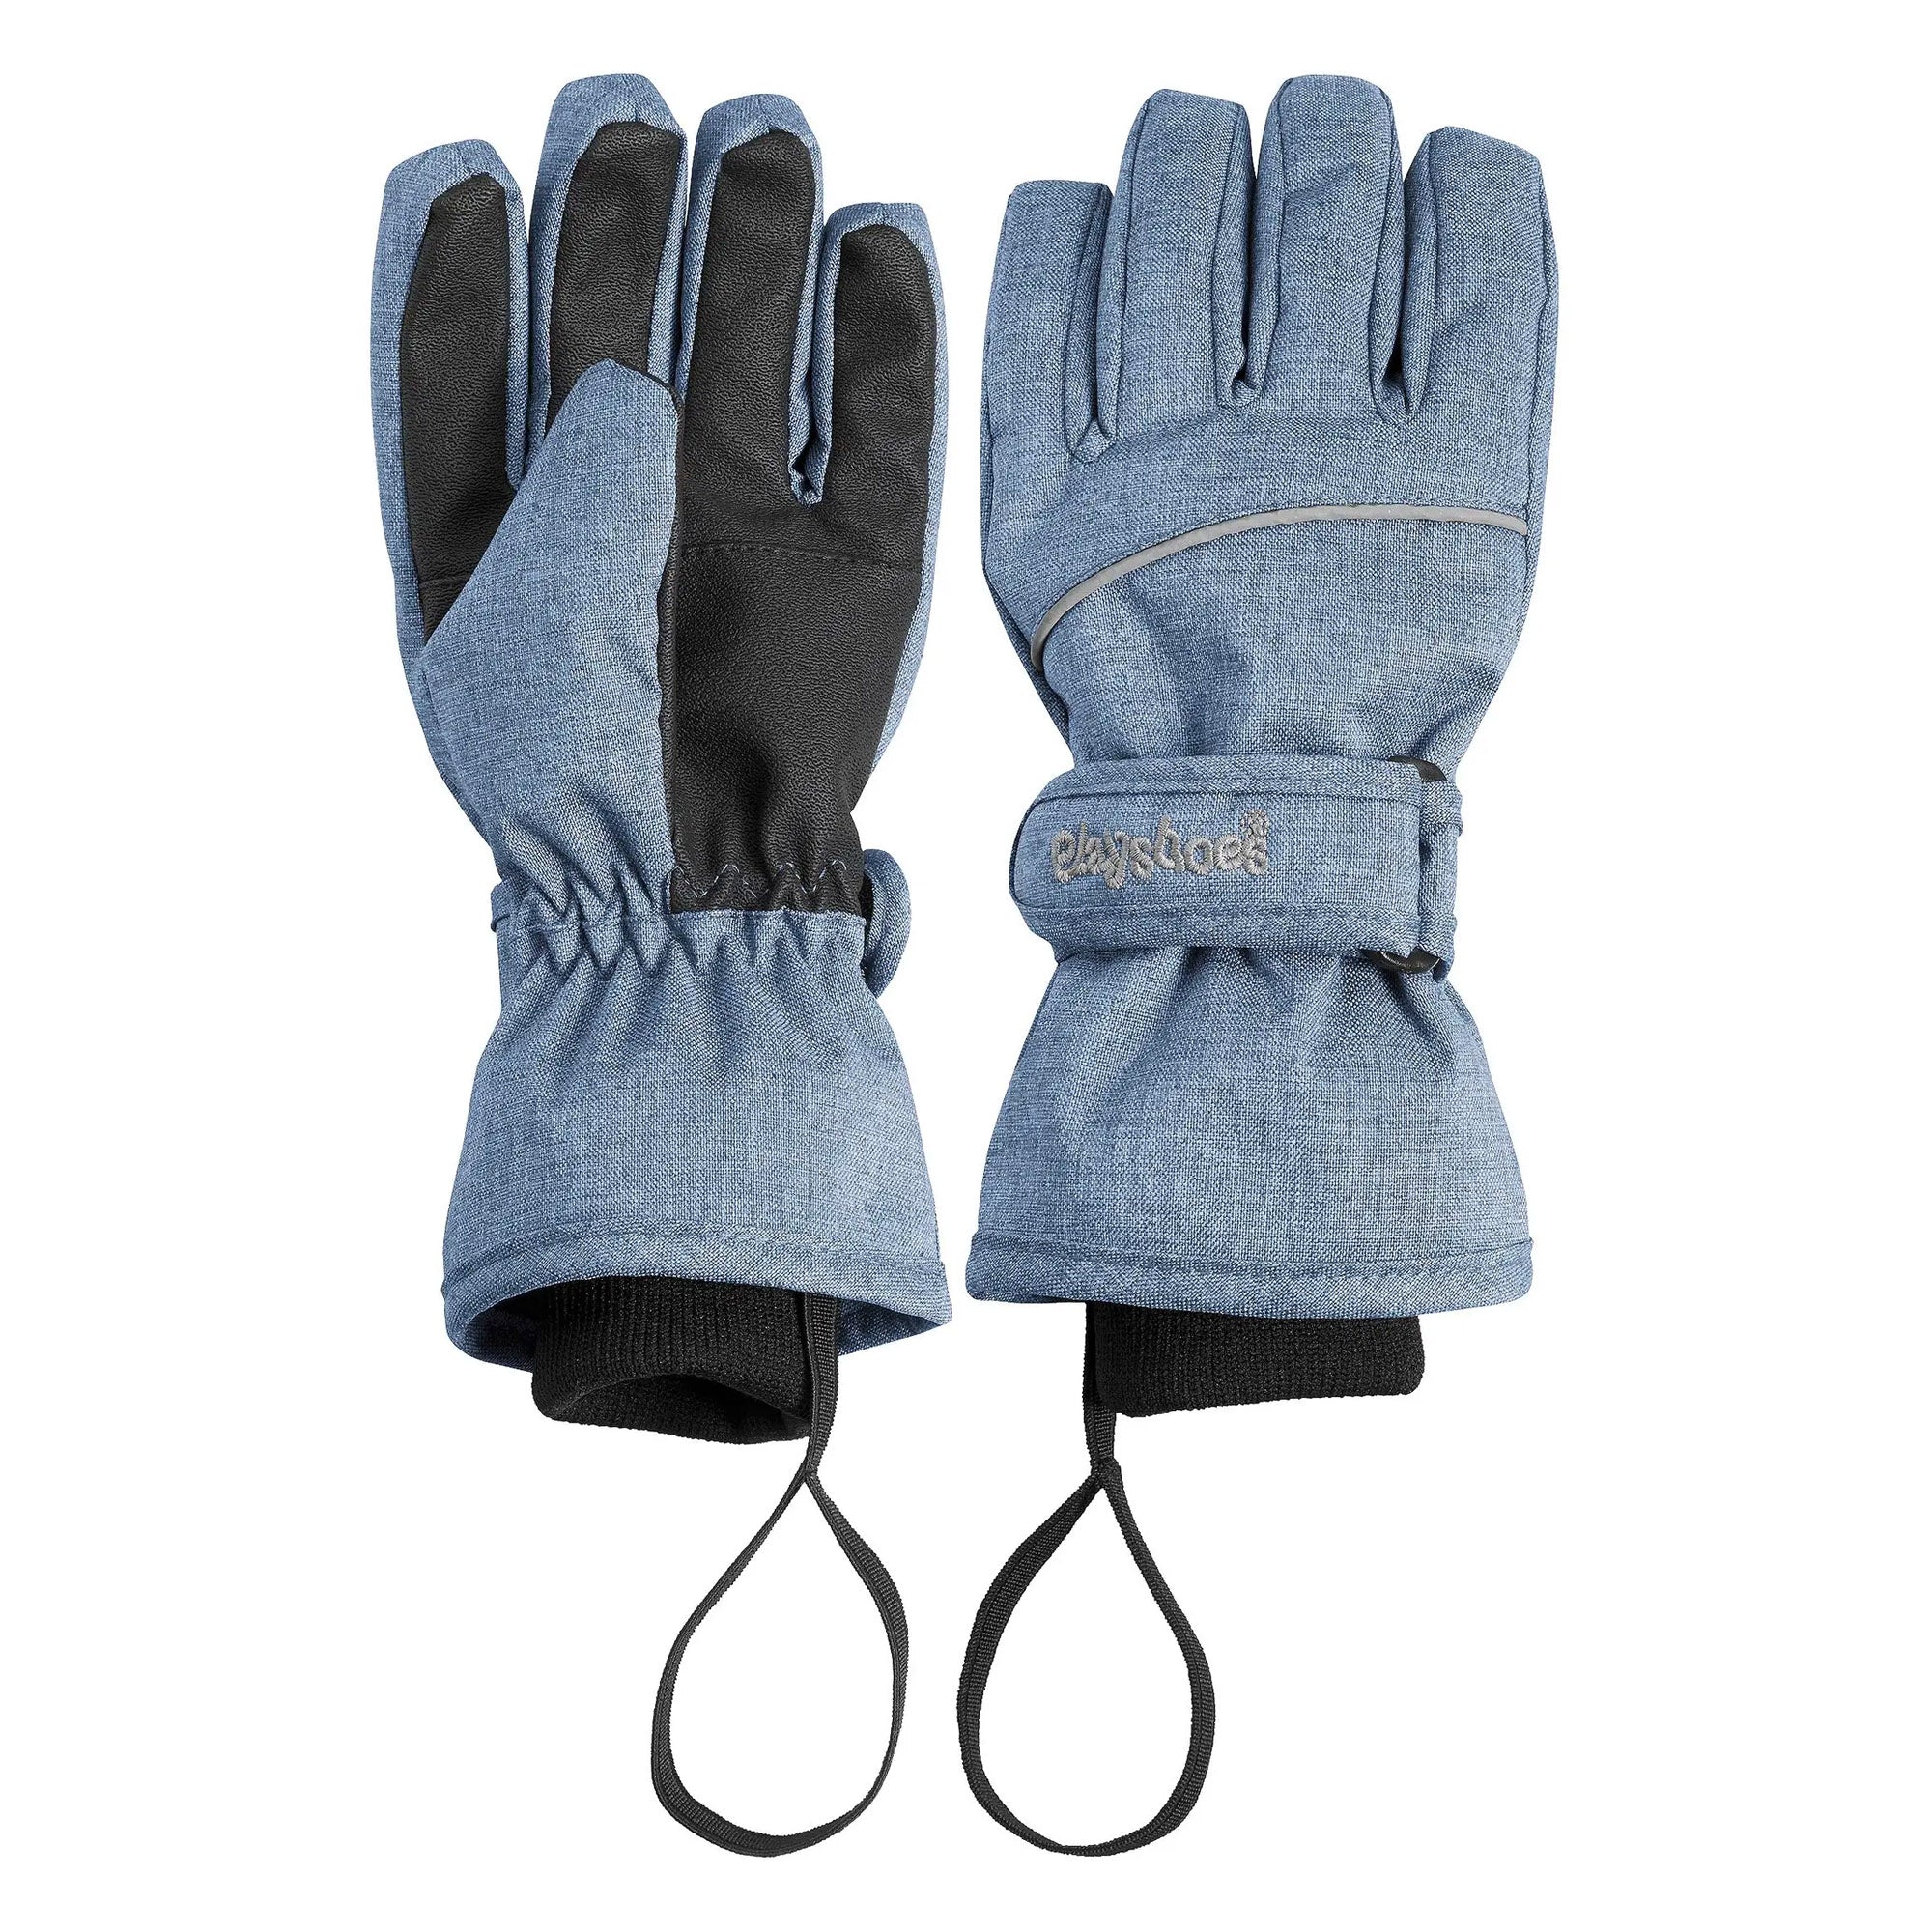 Play Shoes GmbH_Finger Gloves Denim Blue_Accessories